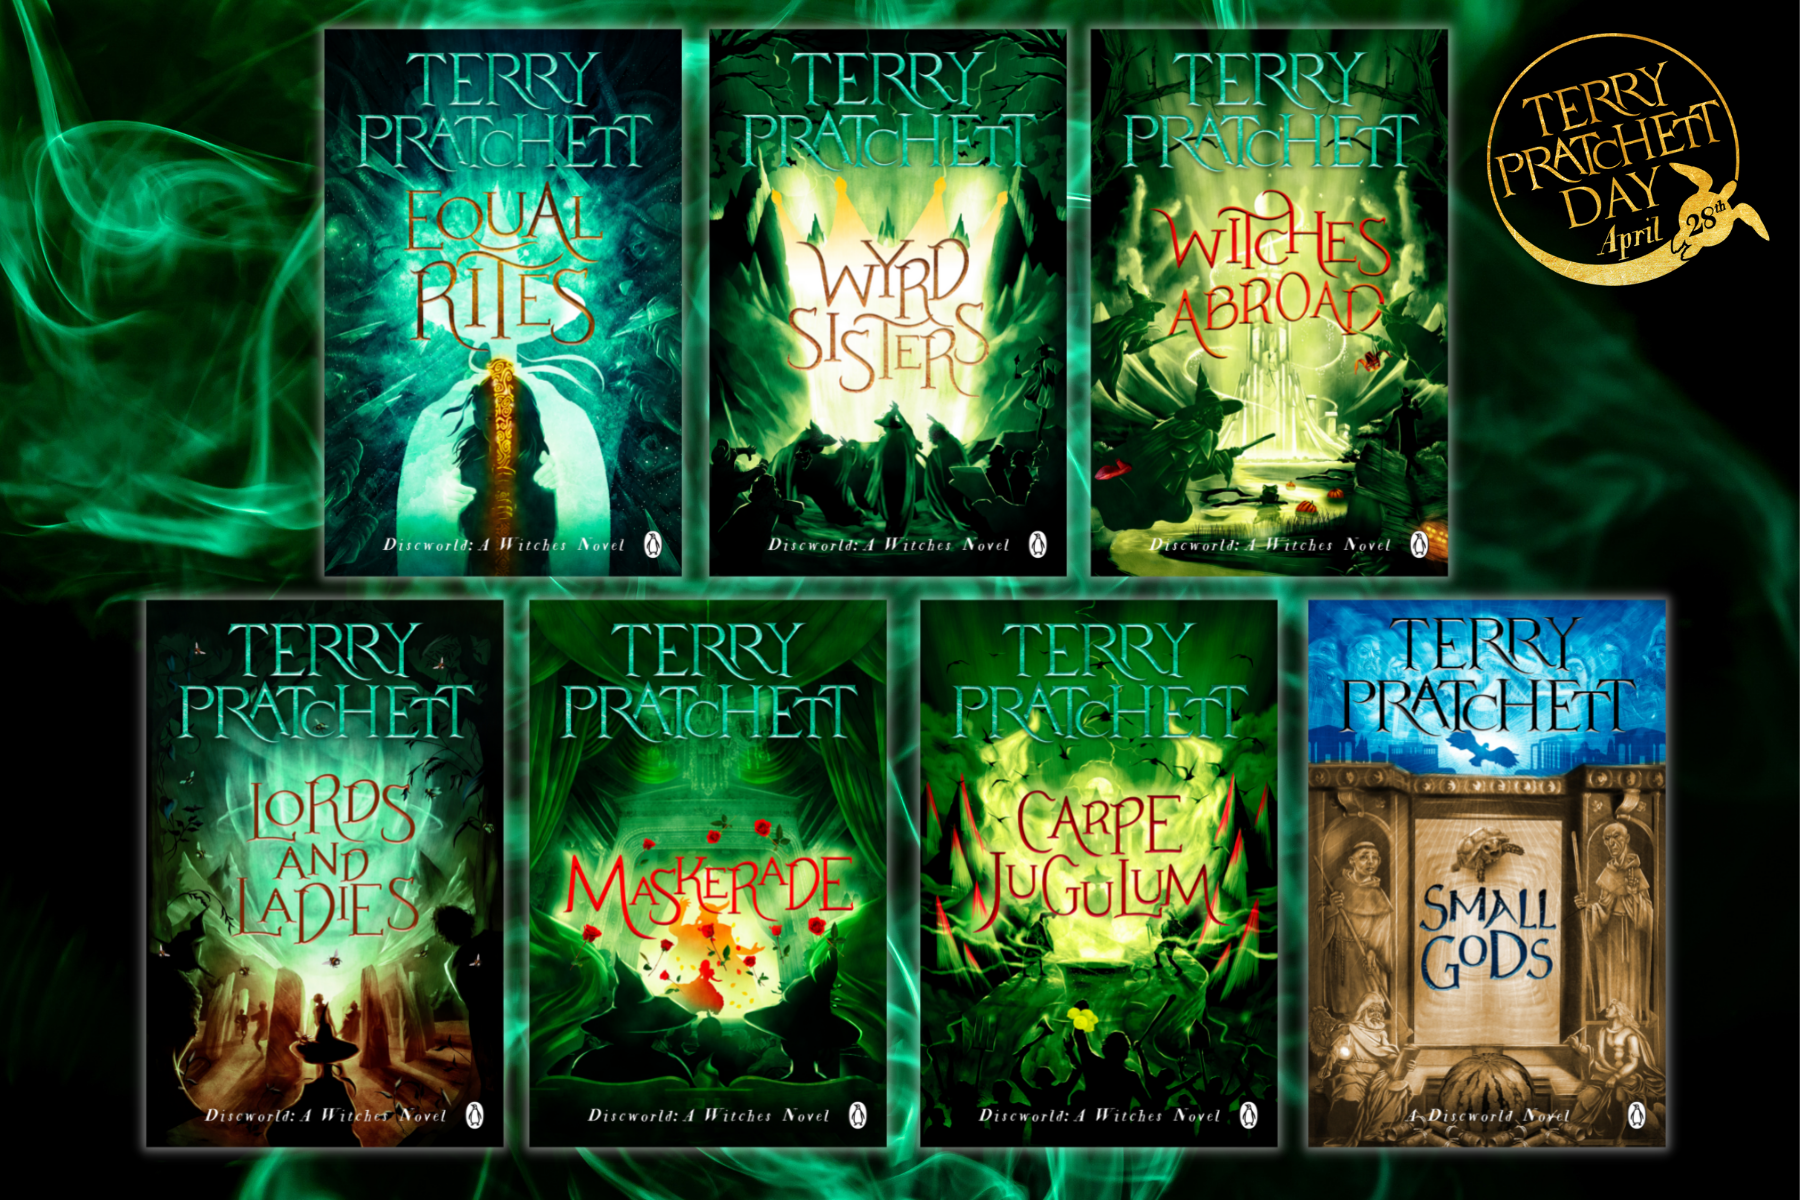 An image of seven Terry Pratchett books against a smoky green background